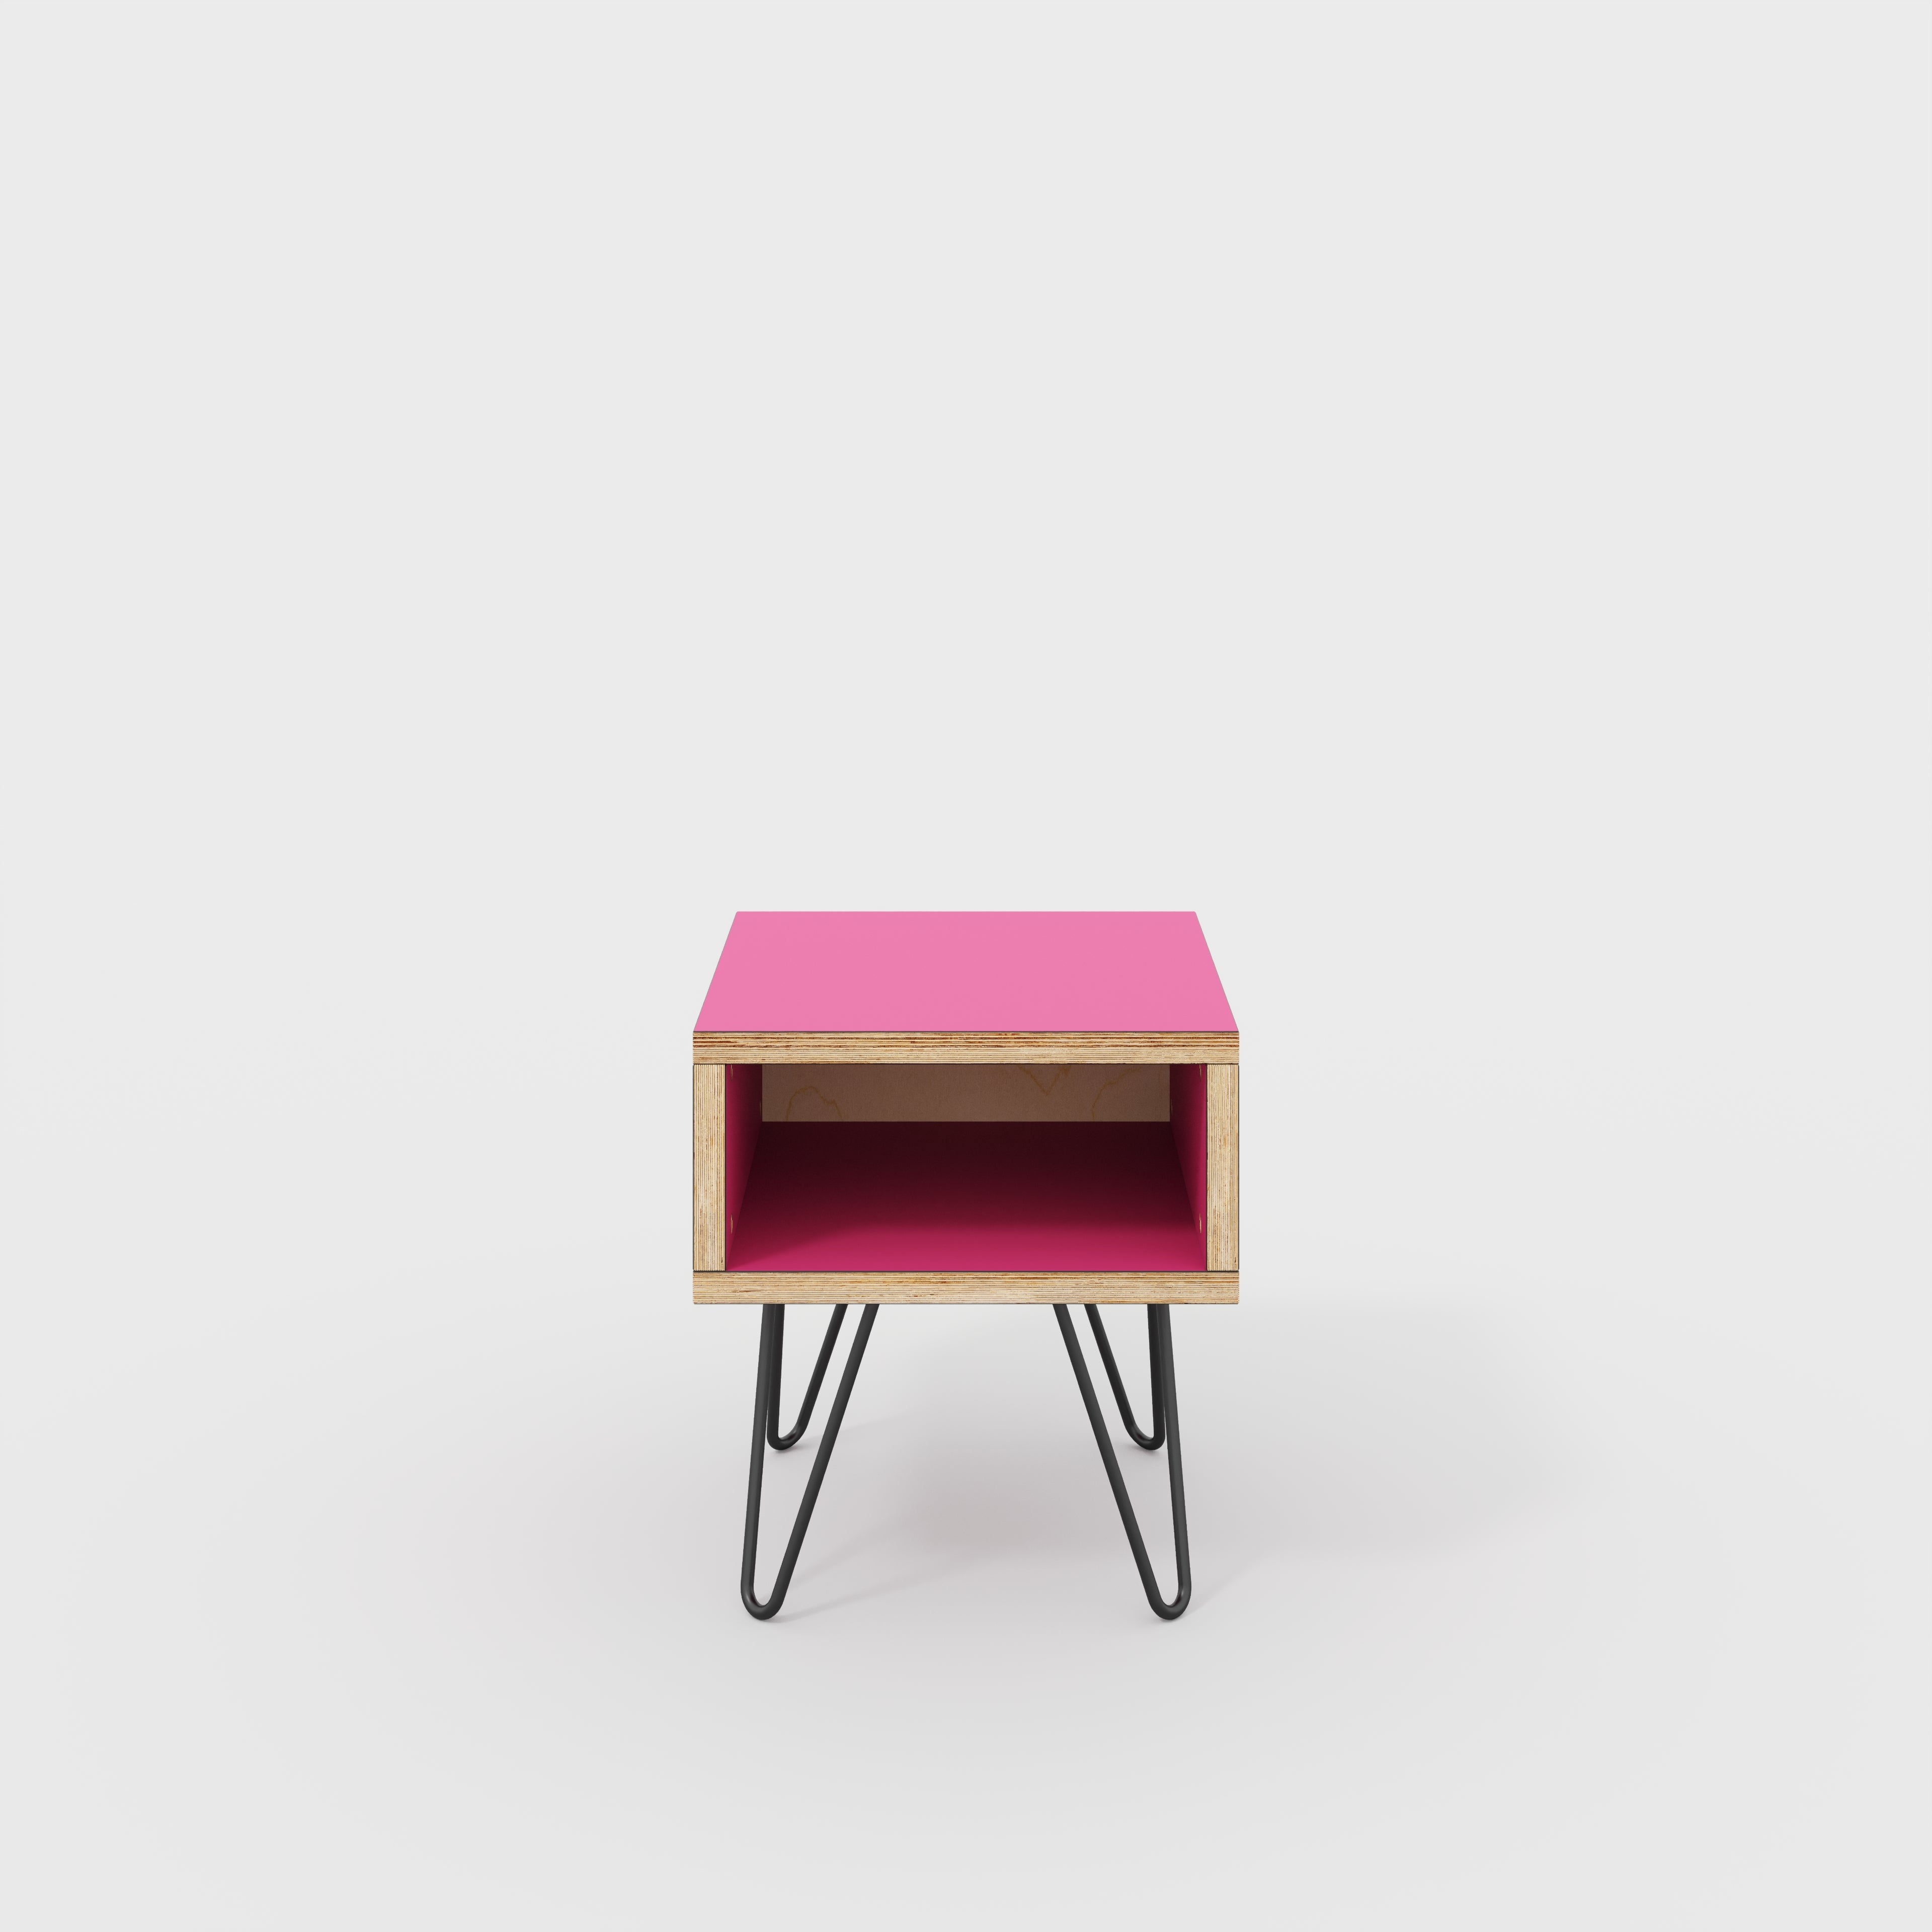 Bedside Table with Box Storage and Black Hairpin Legs - Formica Juicy Pink - 400(w) x 400(d) x 450(h)